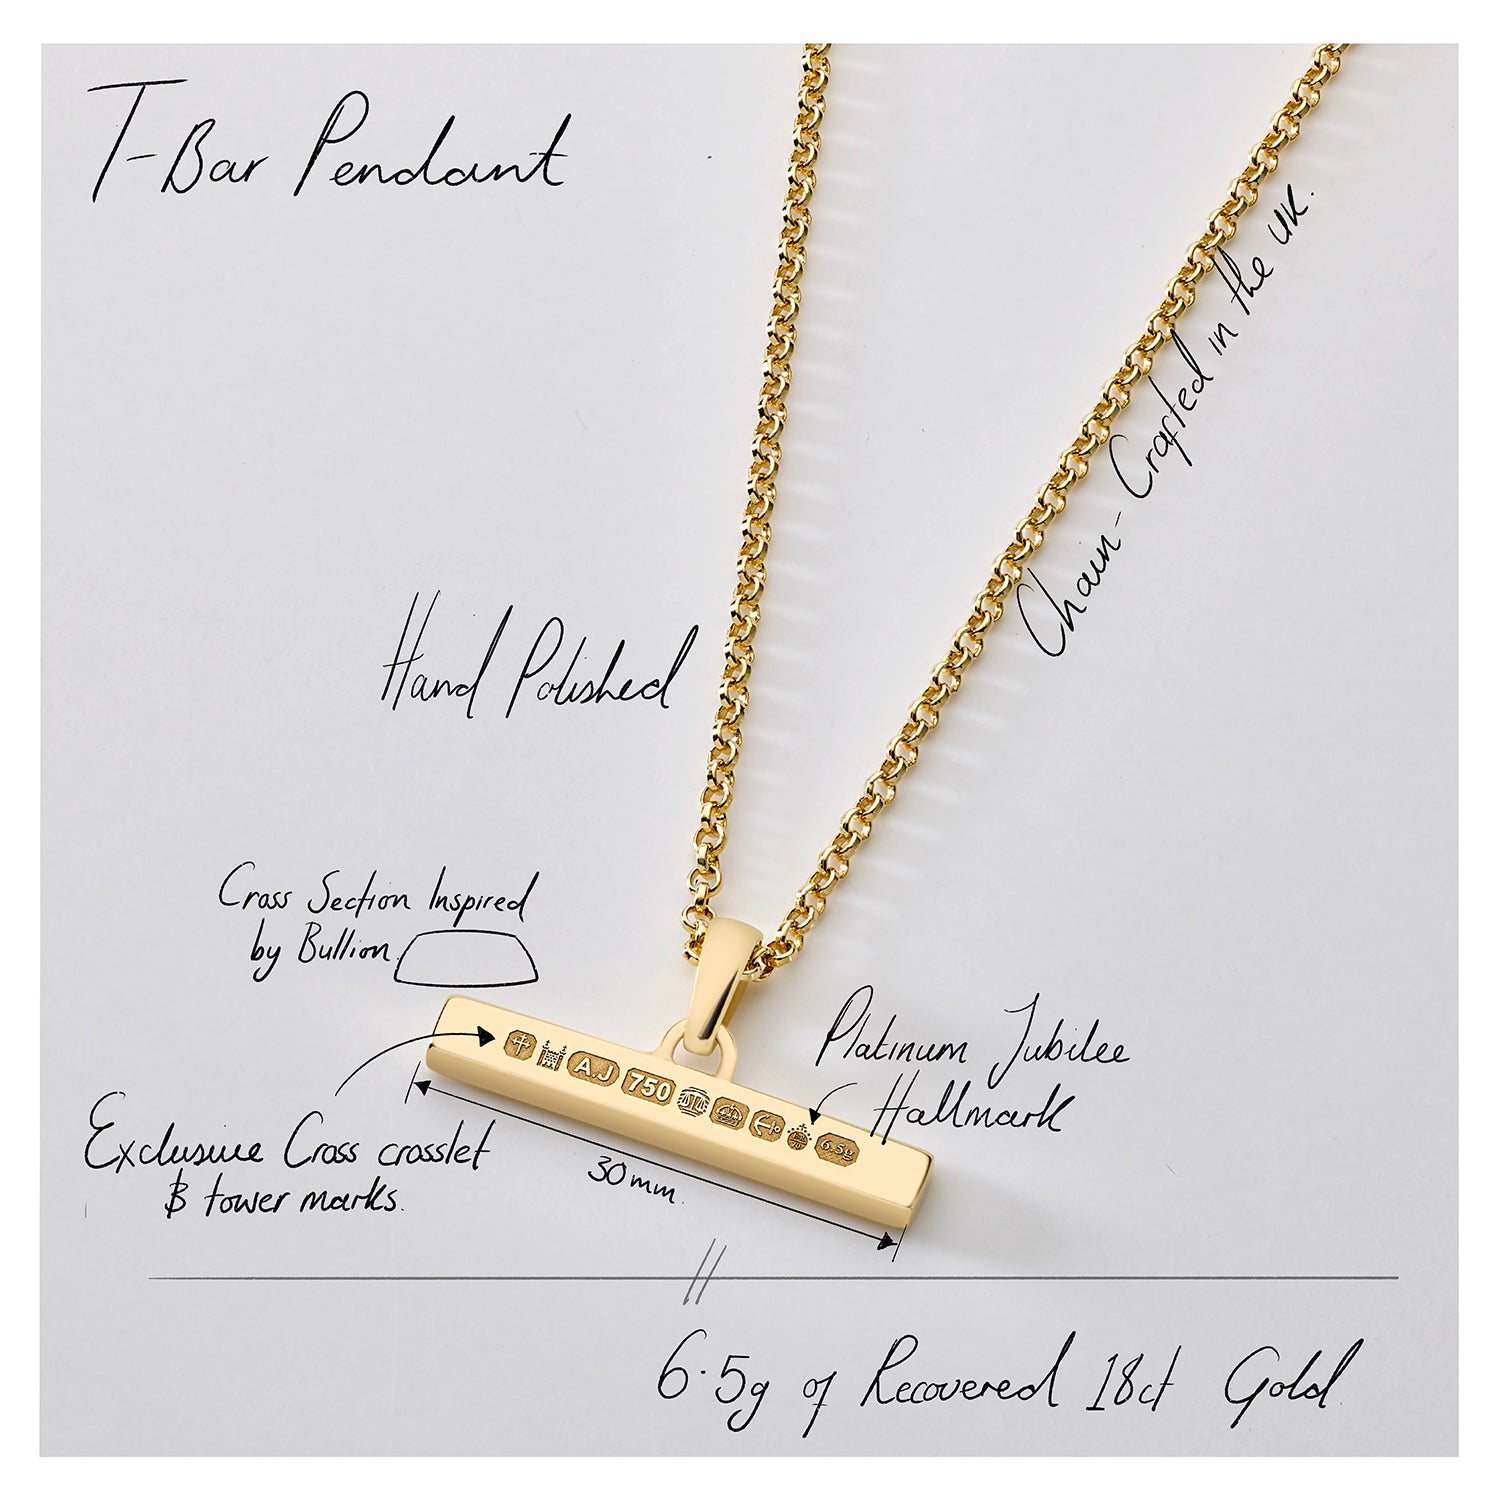 886 Royal Mint Necklaces 886 T-Bar Pendant with Chain in 18ct Yellow Gold